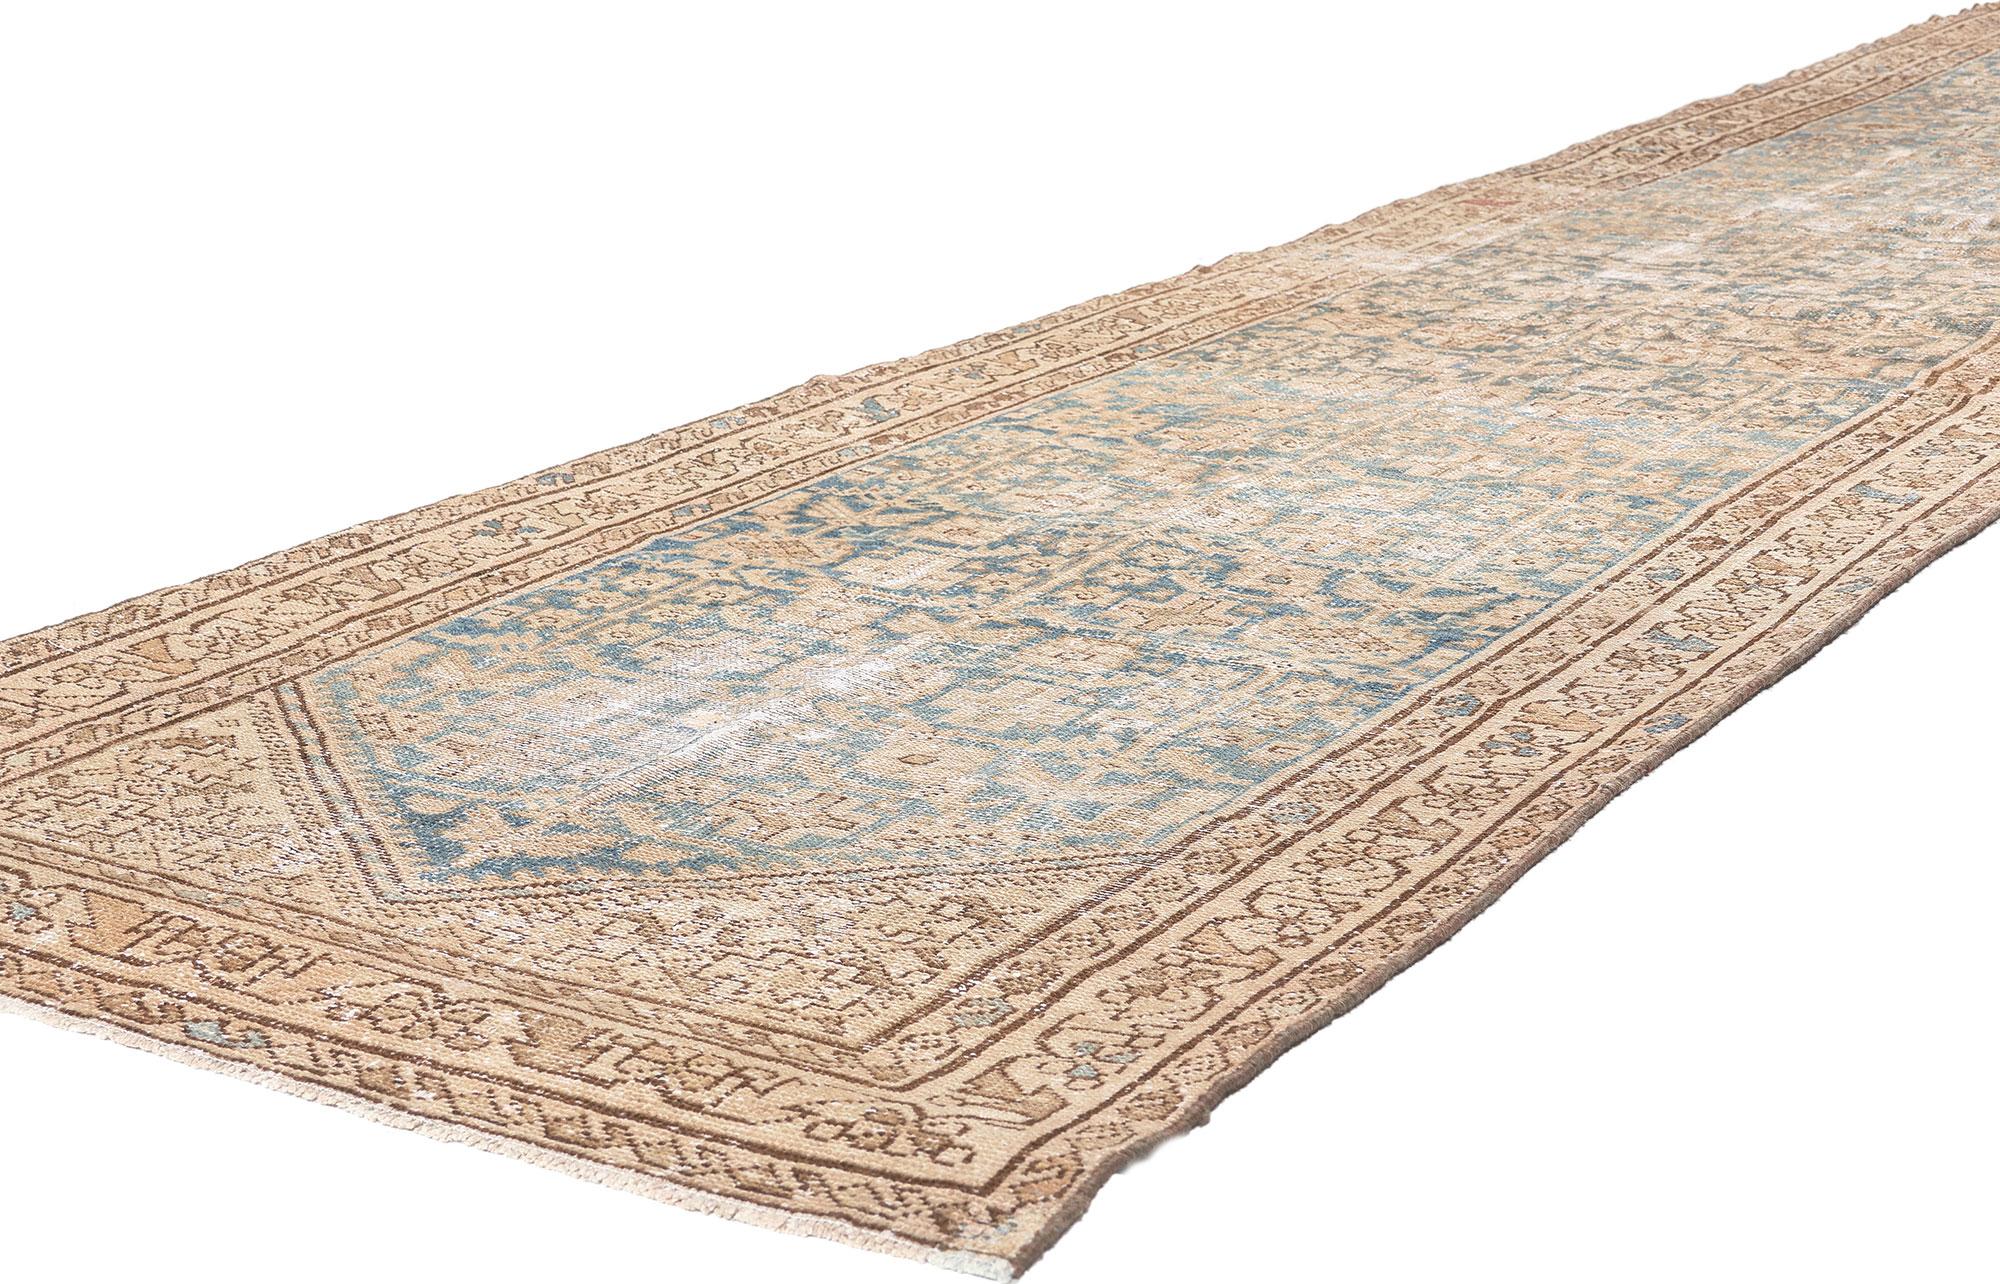 61275 Antique-Worn Persian Malayer Rug, 03'05 x 16'06.
Relaxed refinement meets quitet sophistication​ in this hand knotted wool distressed antique Persian Malayer rug runner.

Rendered in variegated shades of cerulean, tan, Aegean blue, ecru,